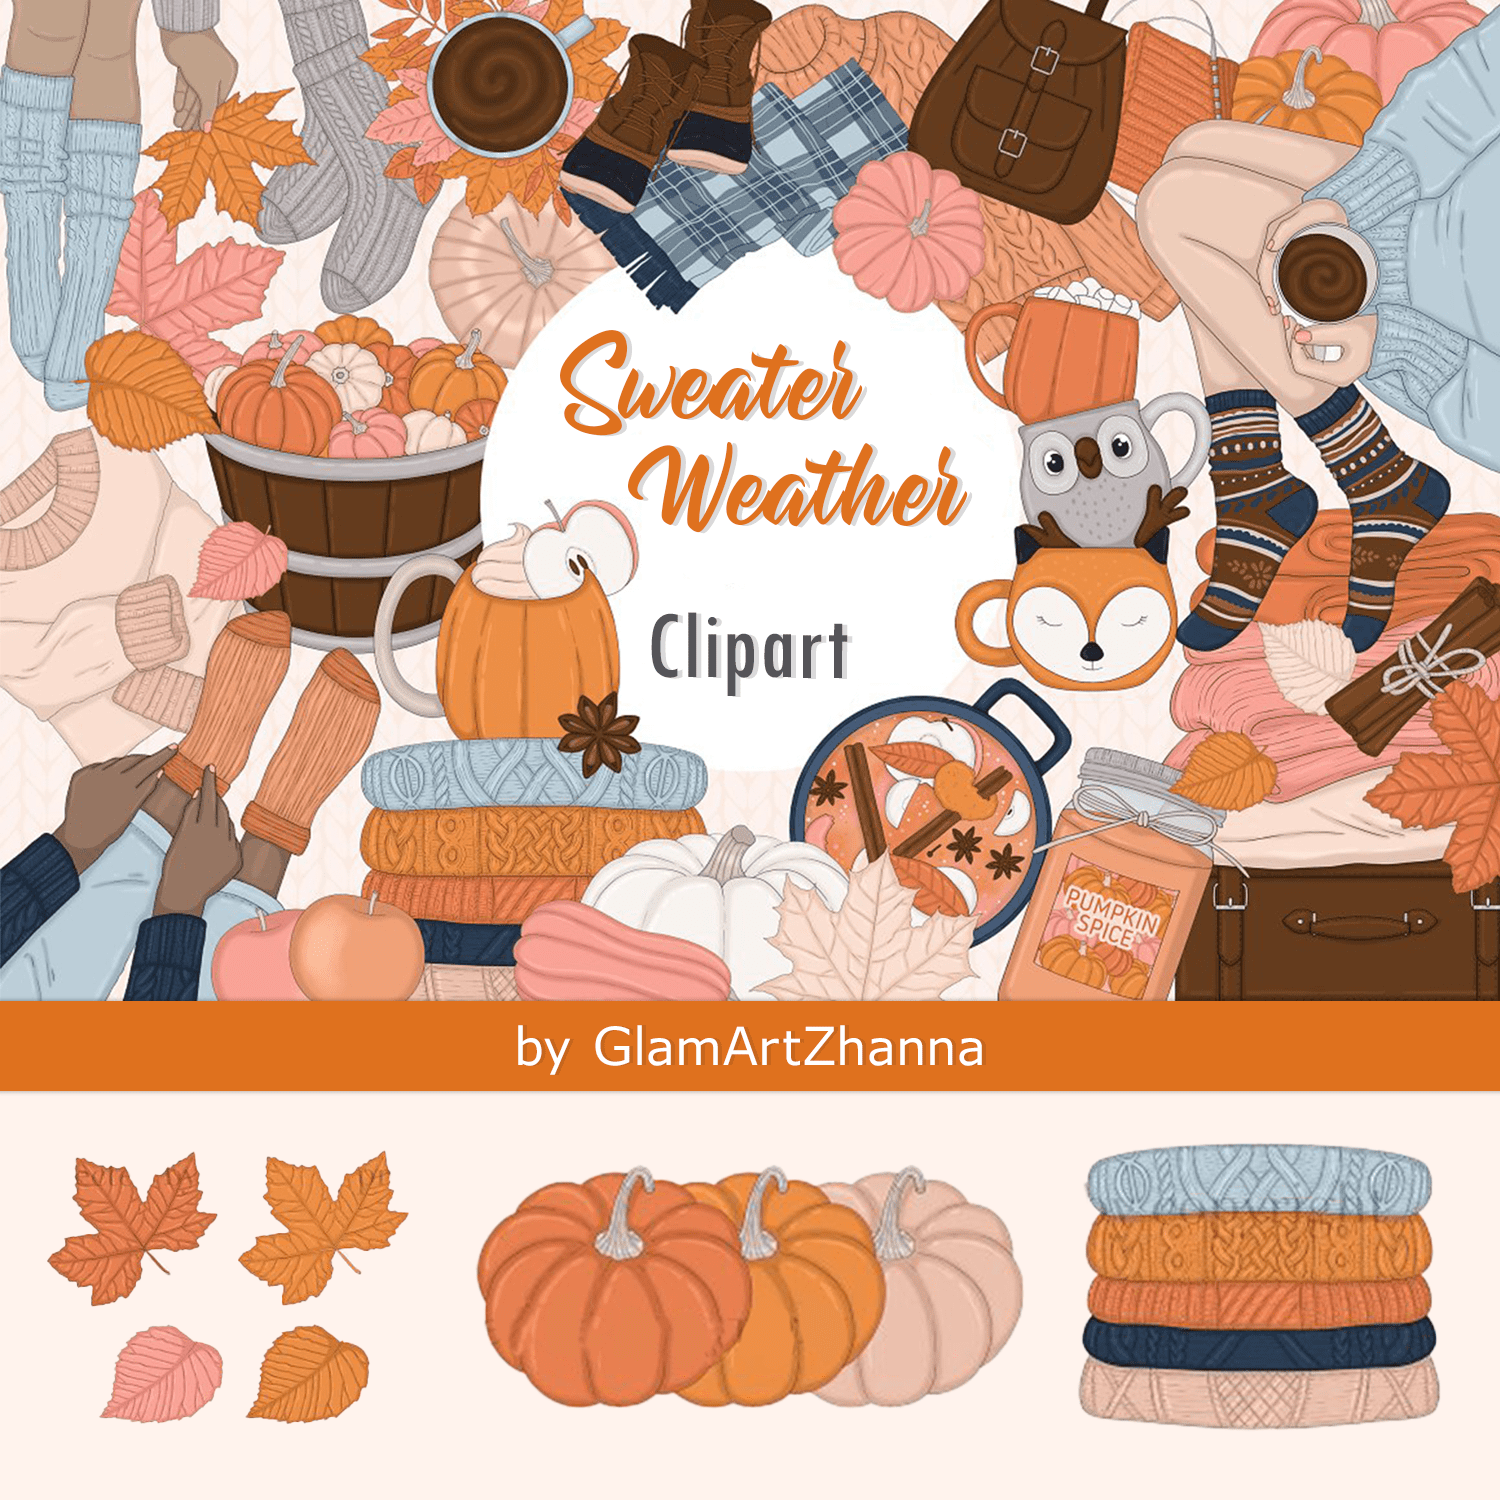 Sweater Weather Clipart cover.